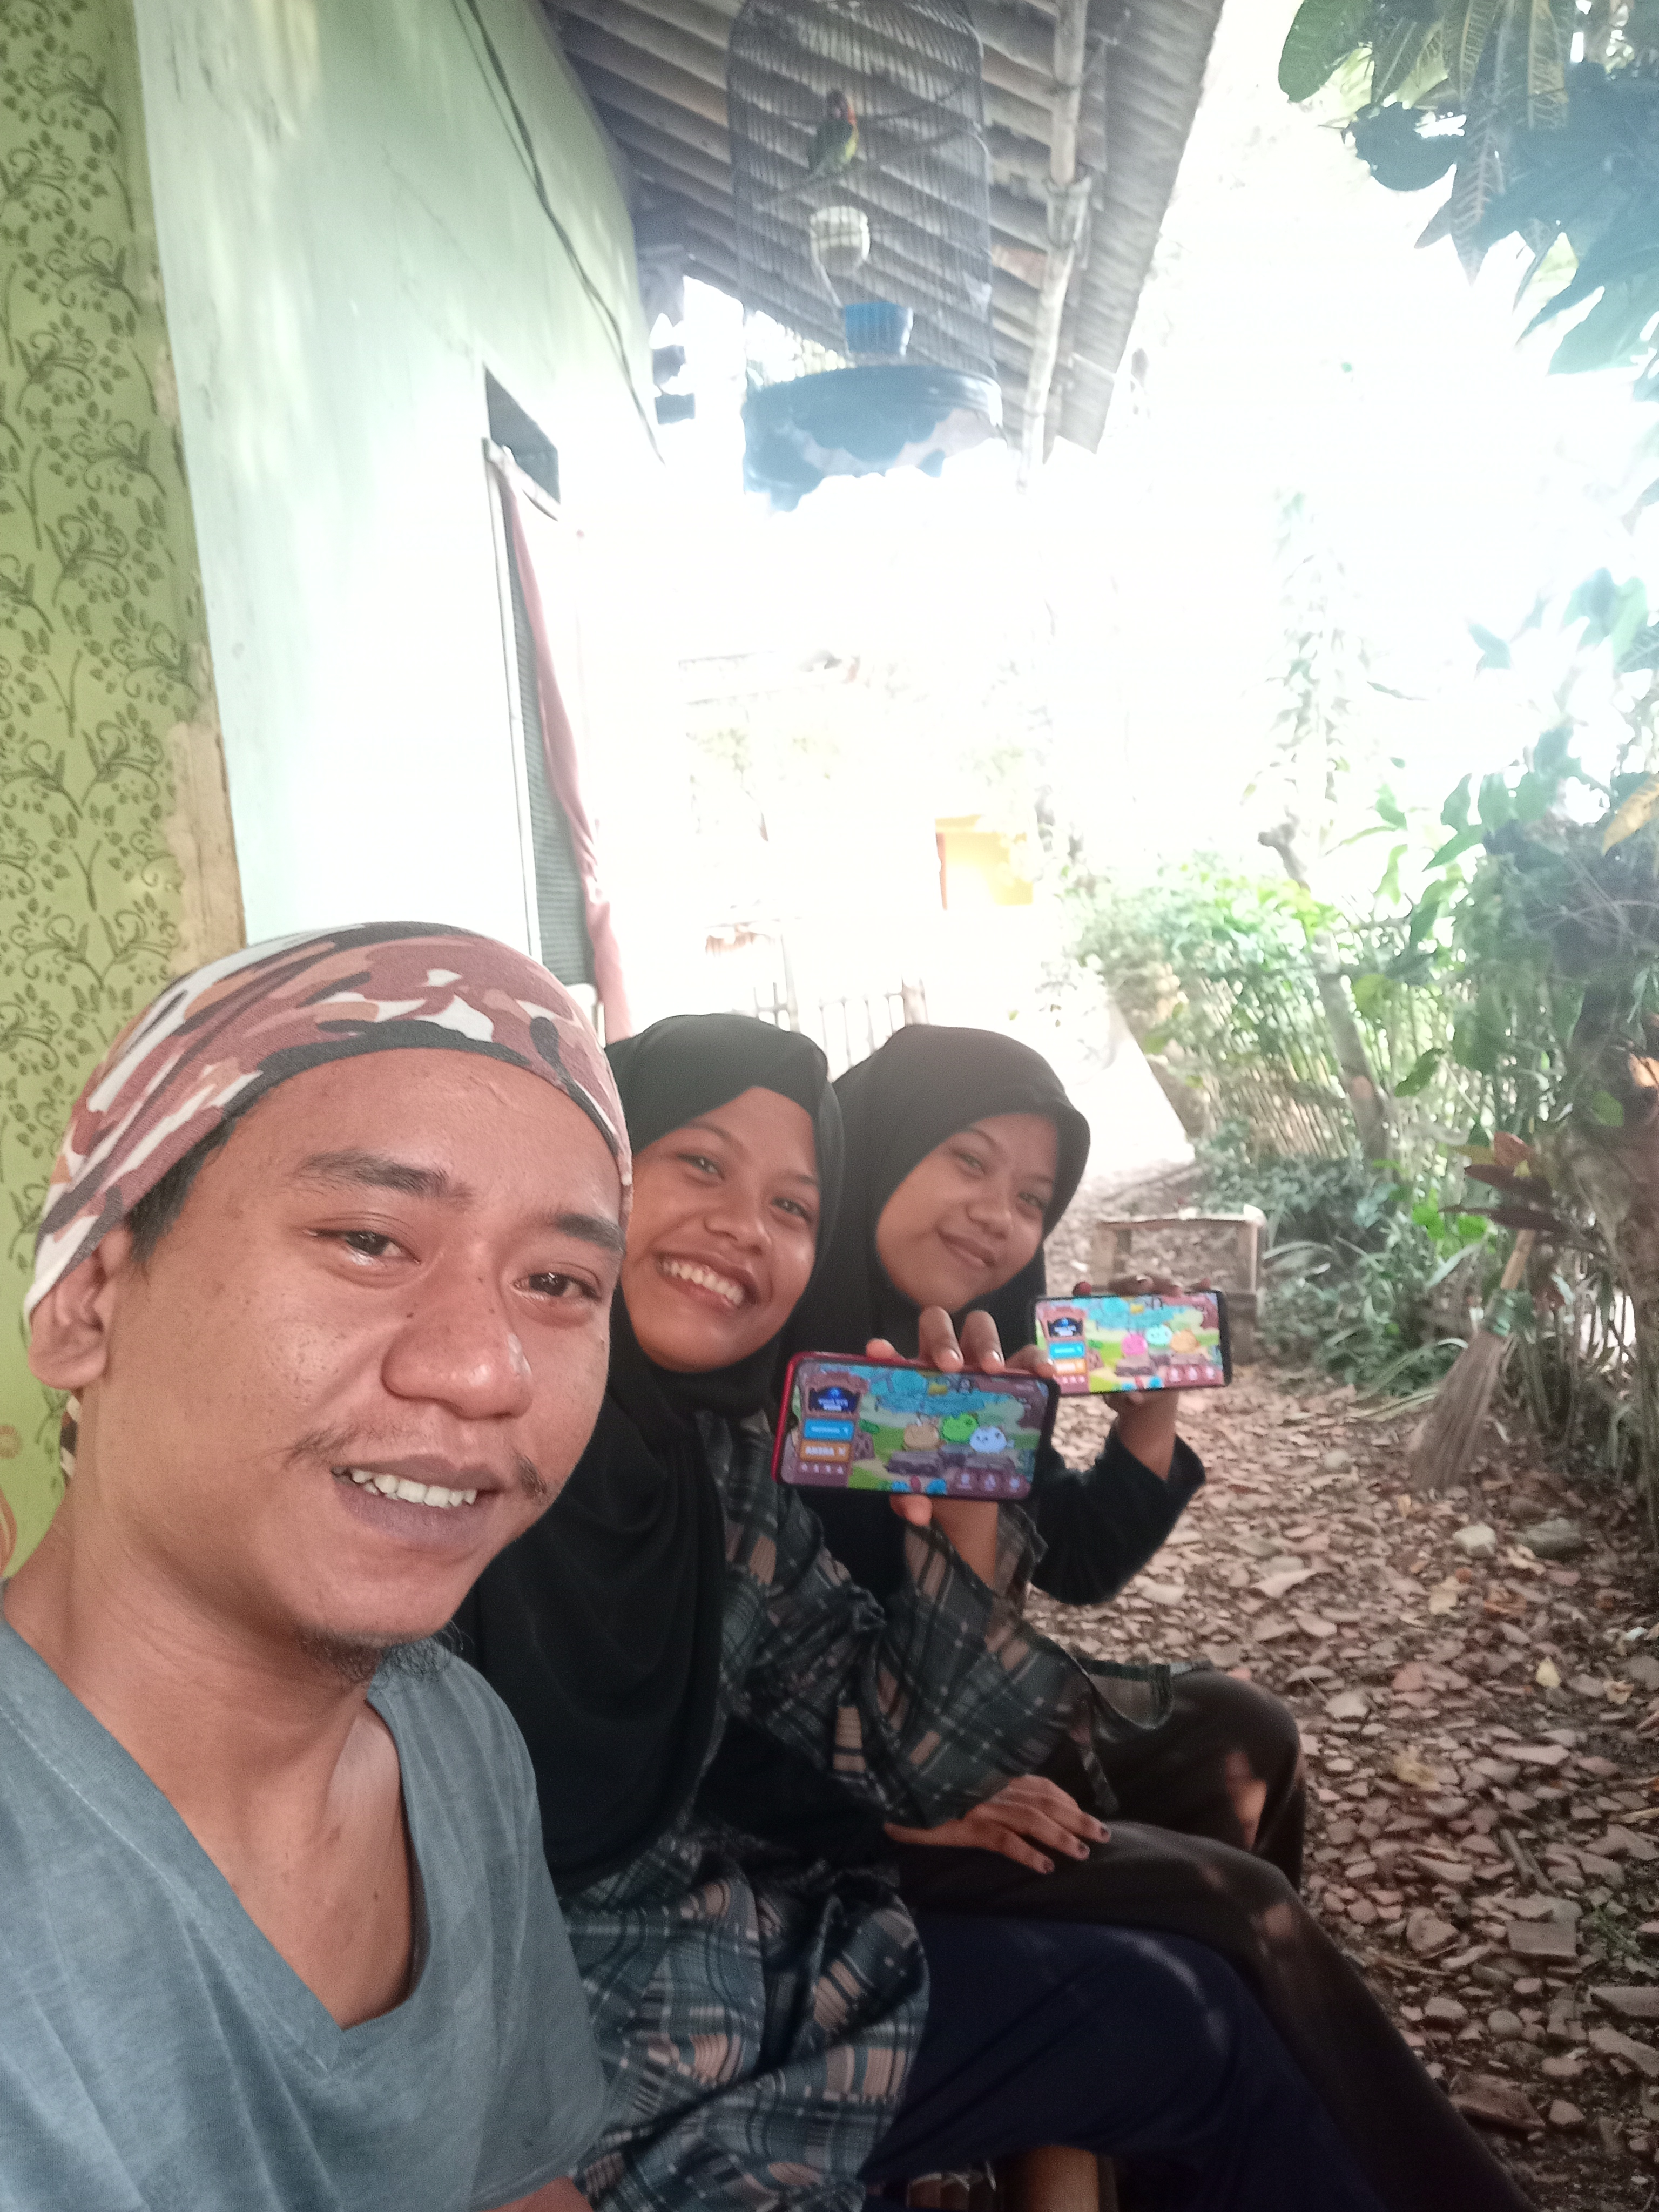 "This is my 3rd payment, and first payment to my two younger sister still hold our payment and will sell later when paying tuition fees, thanks to our mods and the others for the life changer chance" - A.G. WahidinObi